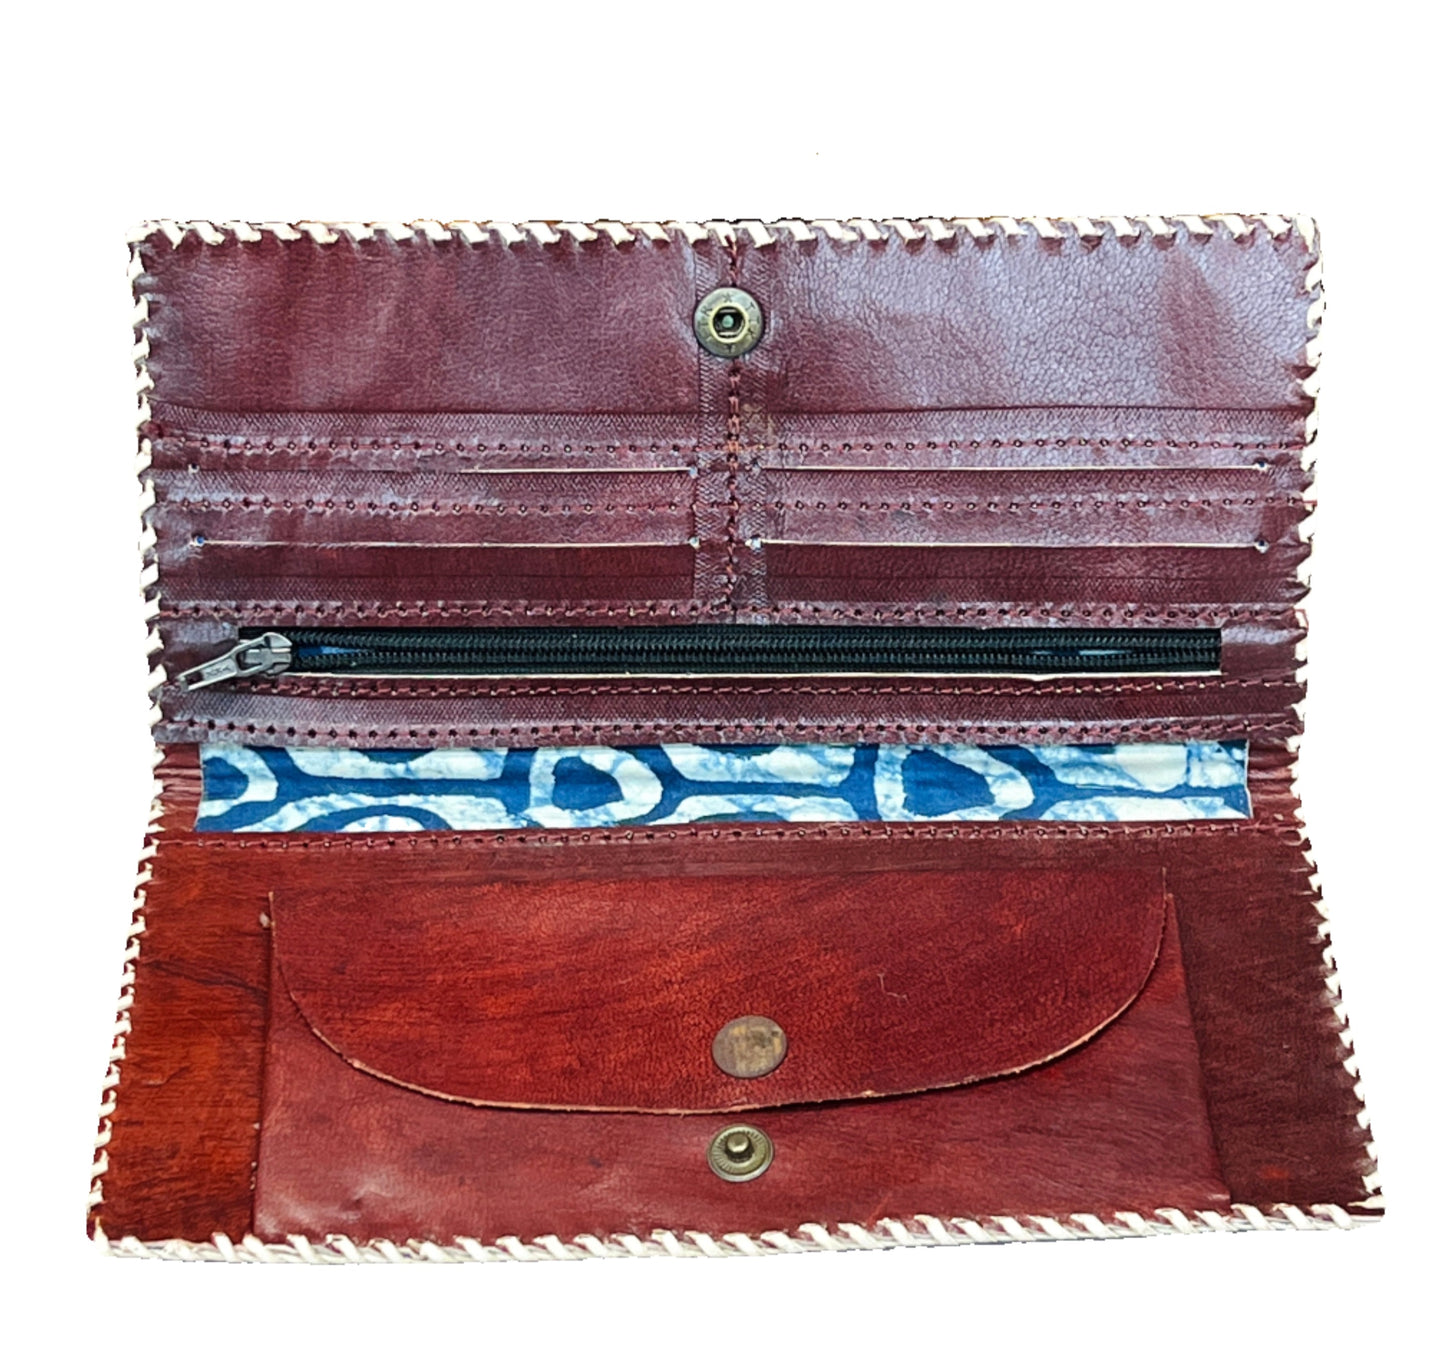 Hand Made Camel Leather Embossed Wallet with Hand Stitch work